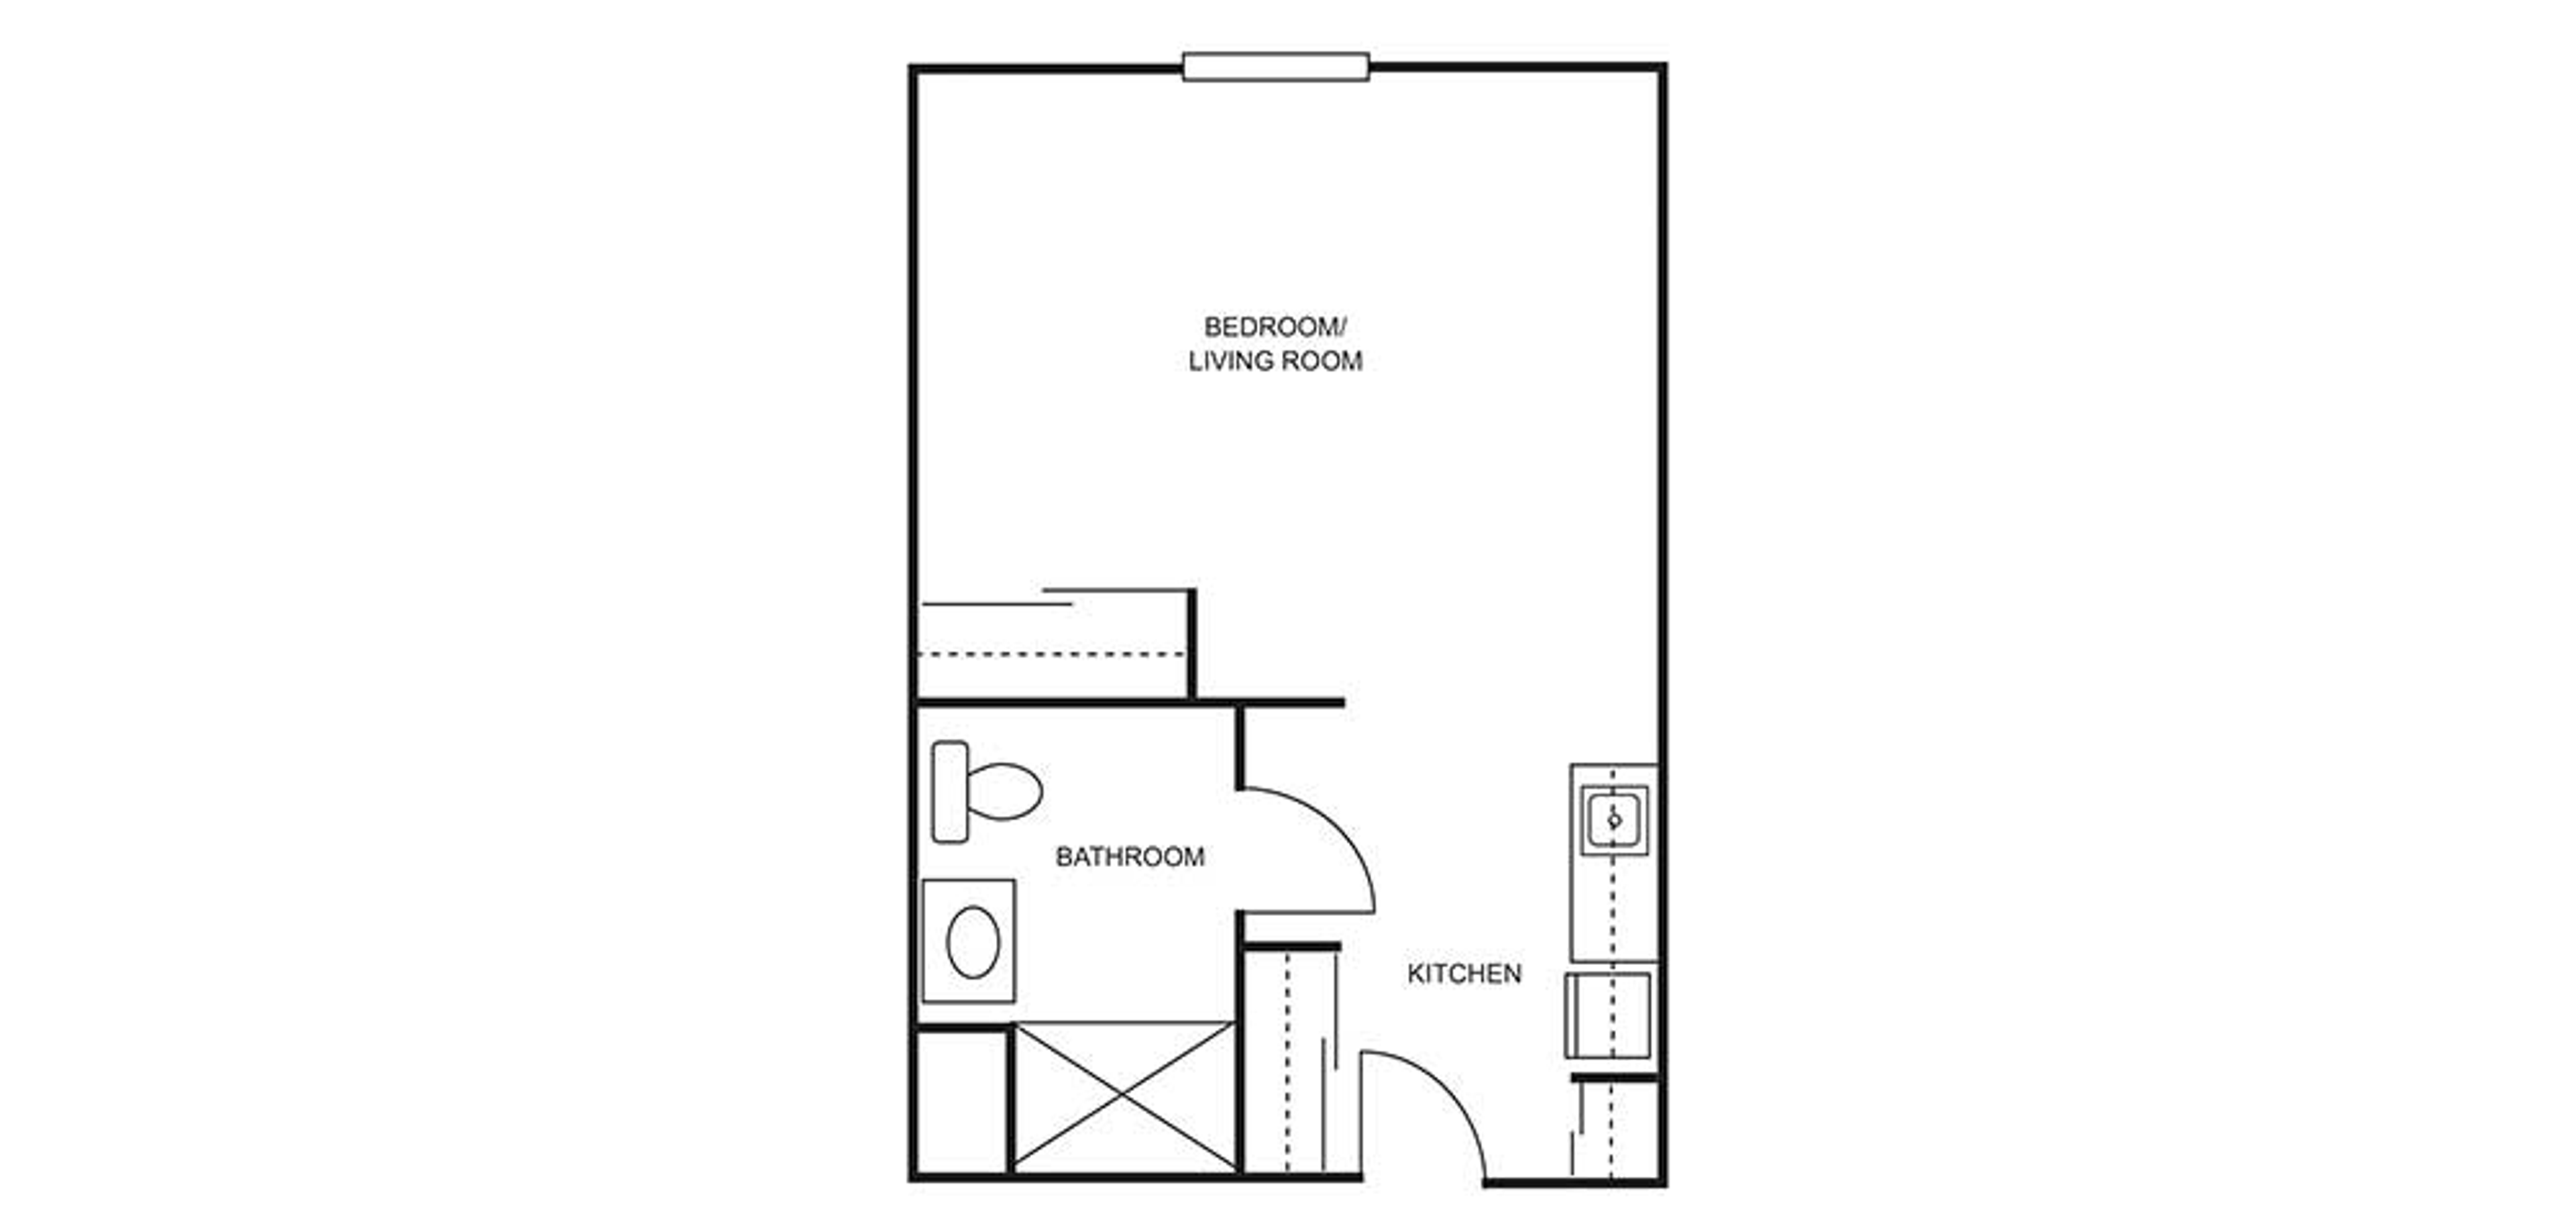 Floorplan - The Auberge at Missoula Valley - 1 bed, 1 bath, Aclove Assisted Living